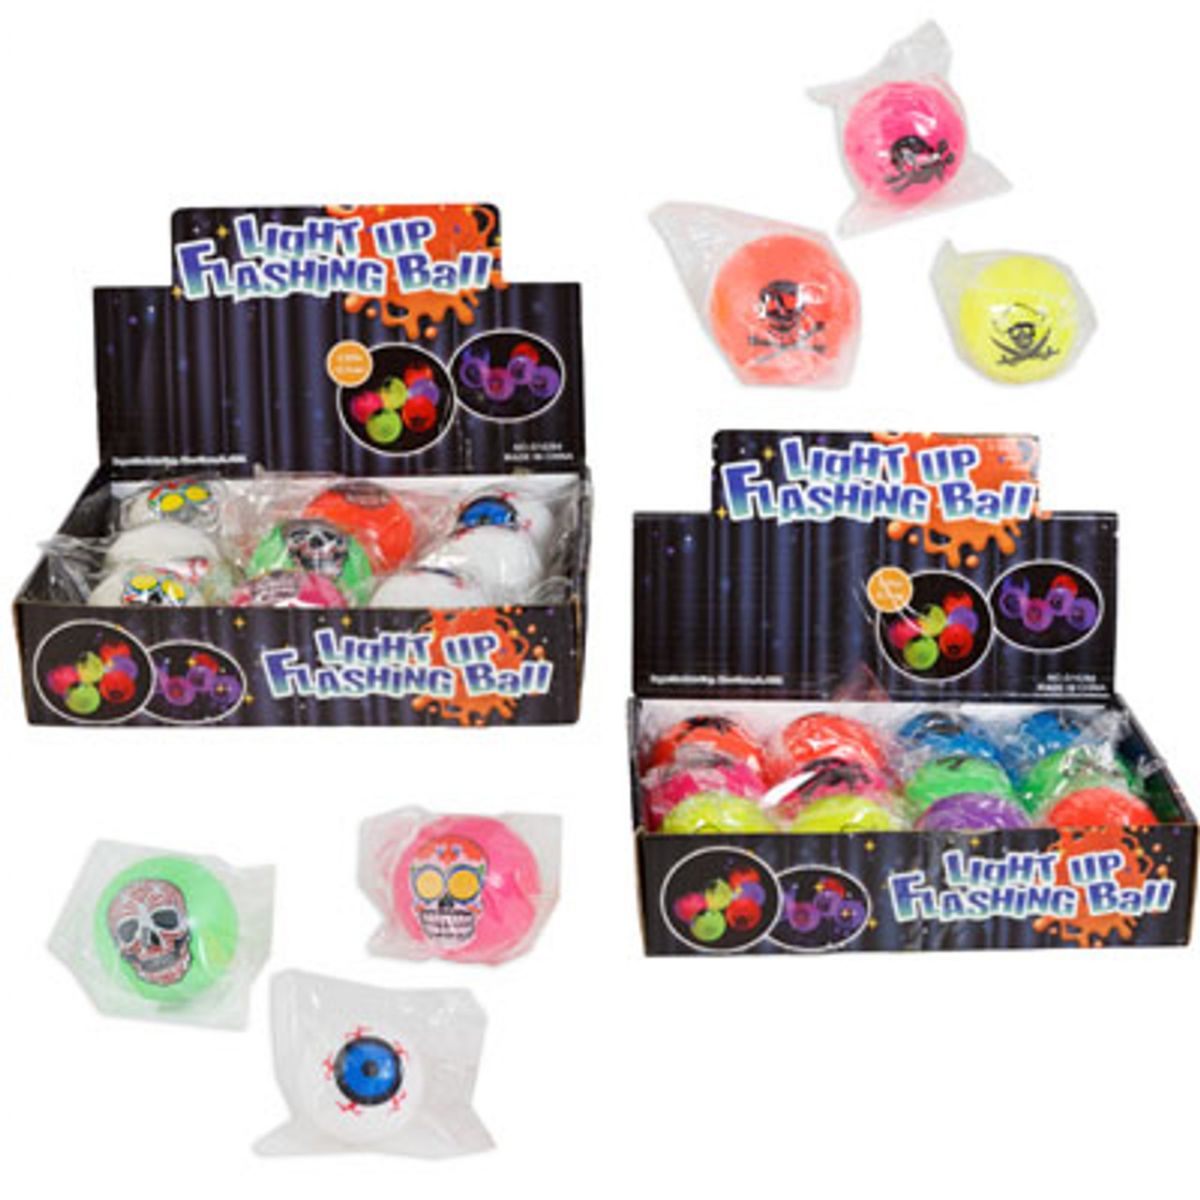 24 Pieces of Light Up Flashing Ball 2.25in Pirate/ Skull/ Eyeball In Polybag